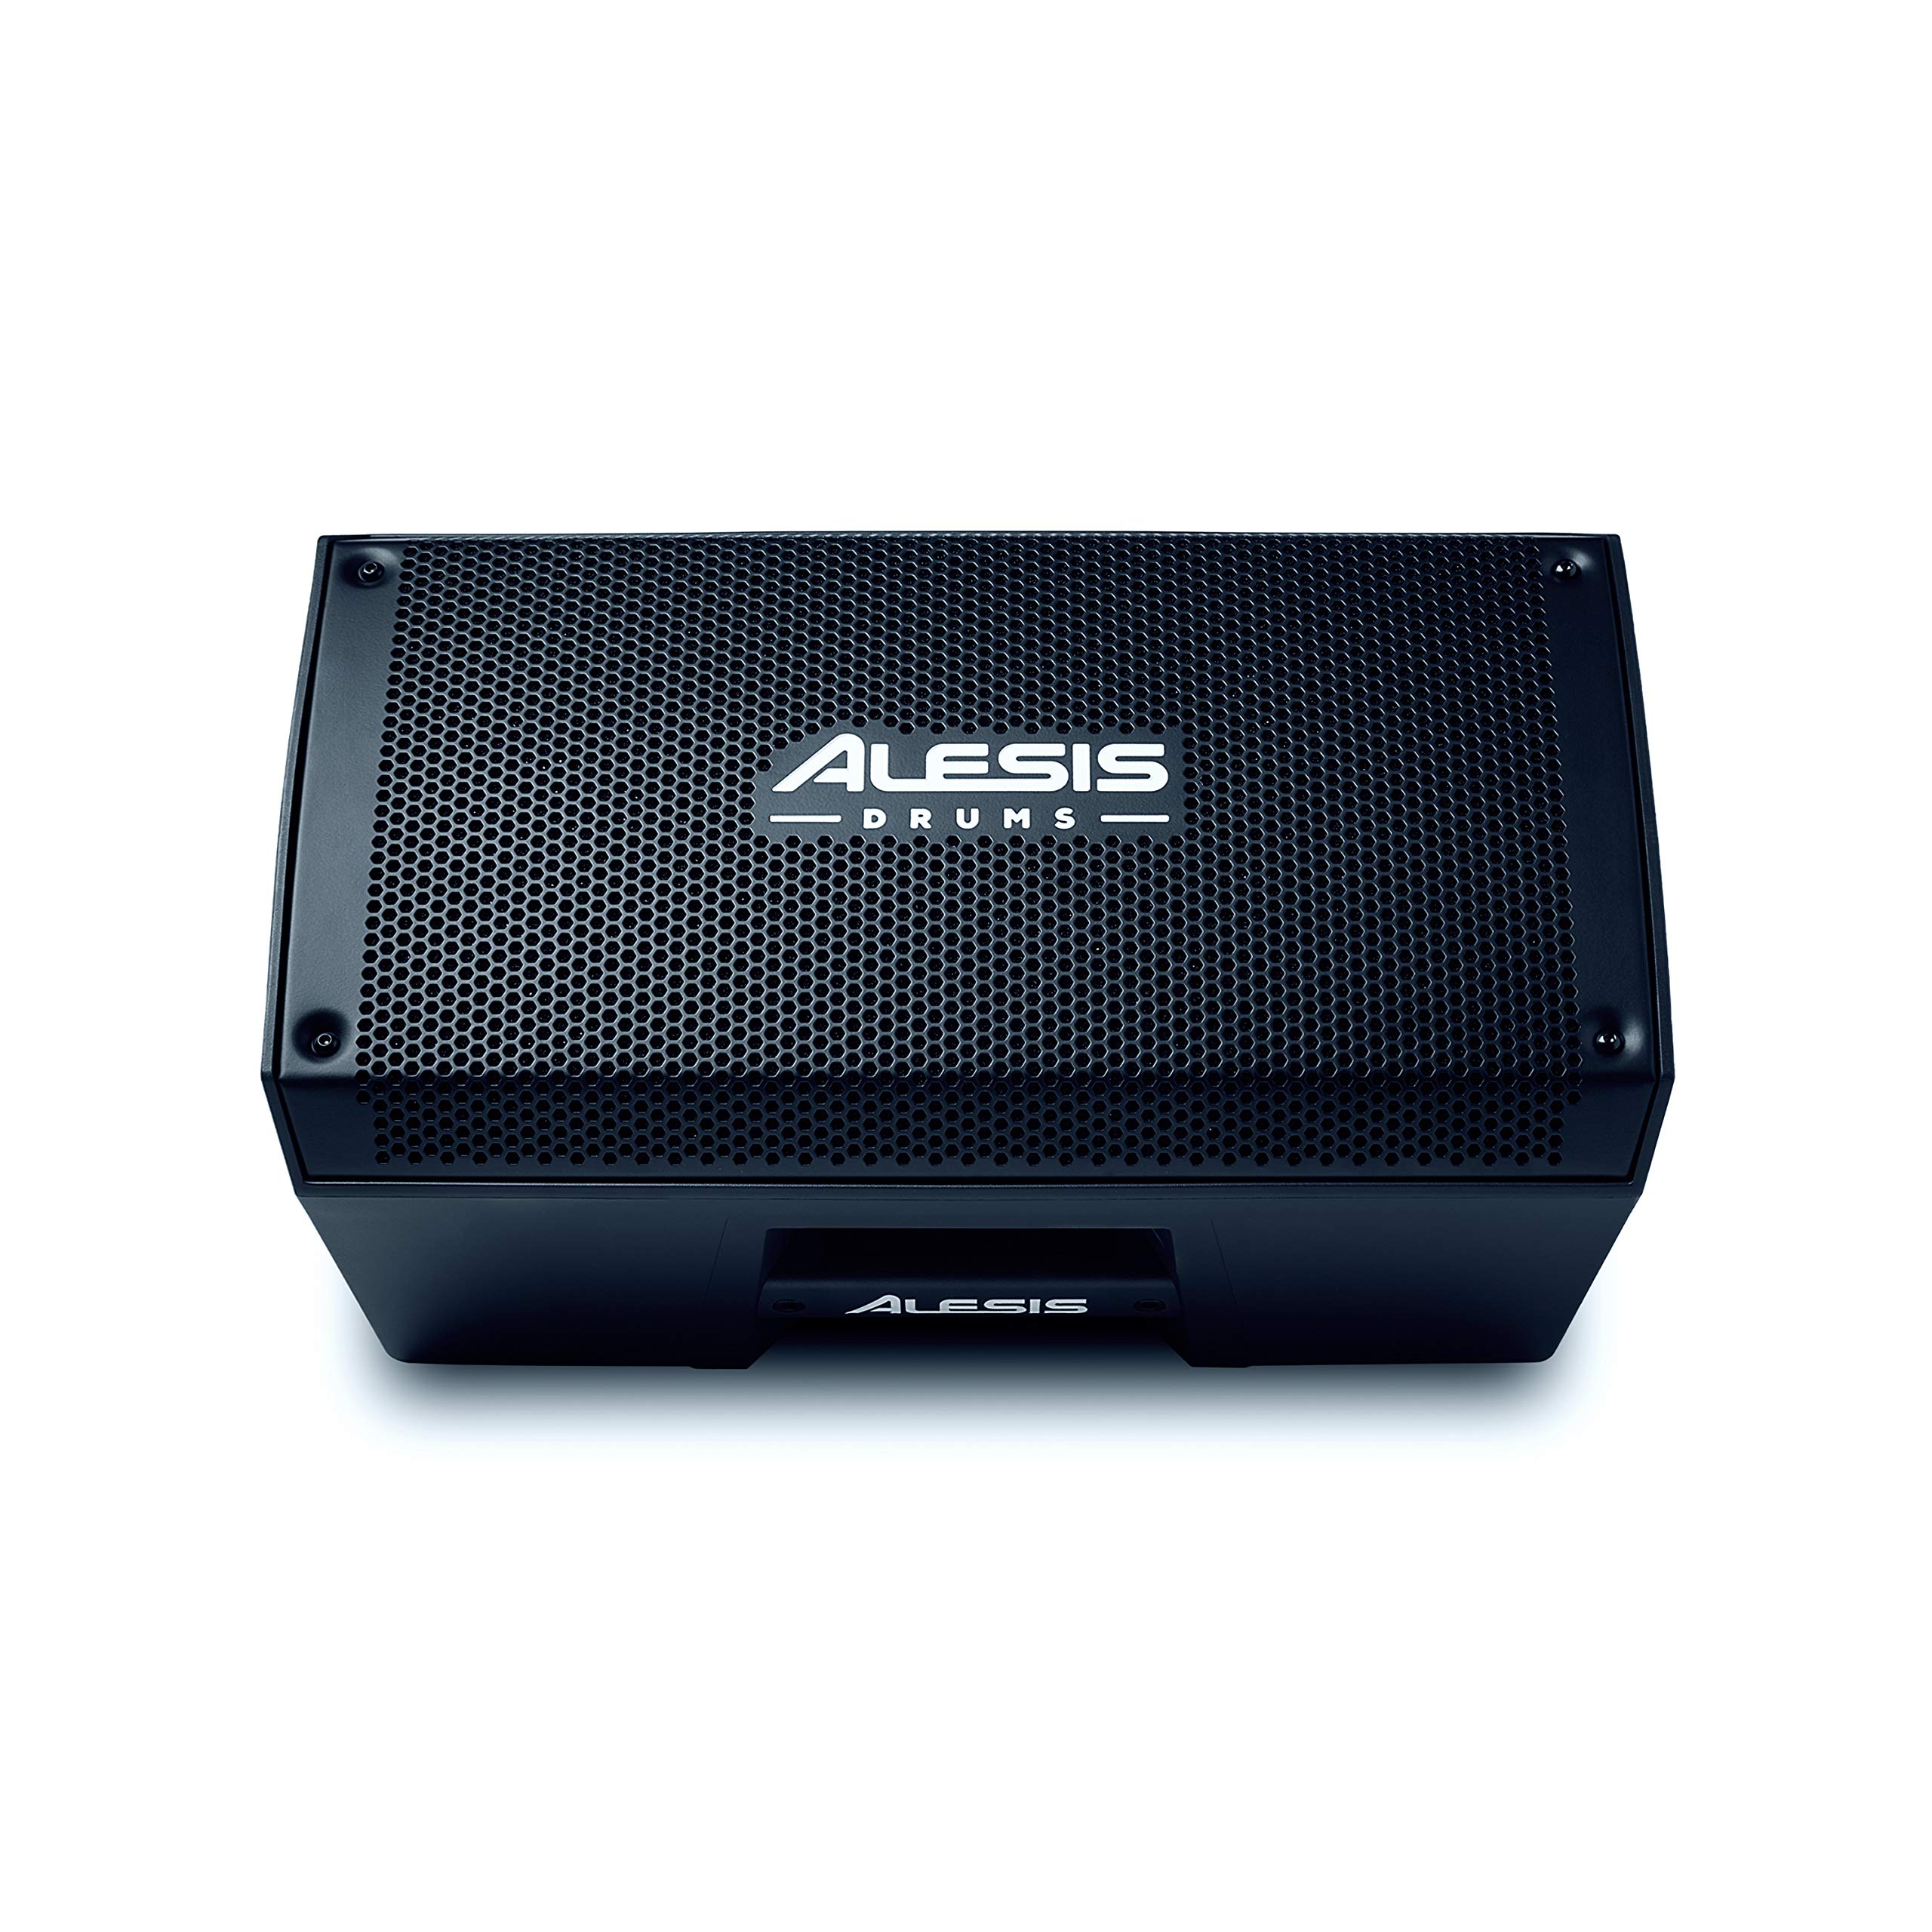 Alesis Strike Amp 8 | 2000-Watt Portable Speaker/Amplifier for Electronic Drum Kits With 8-Inch Woofer